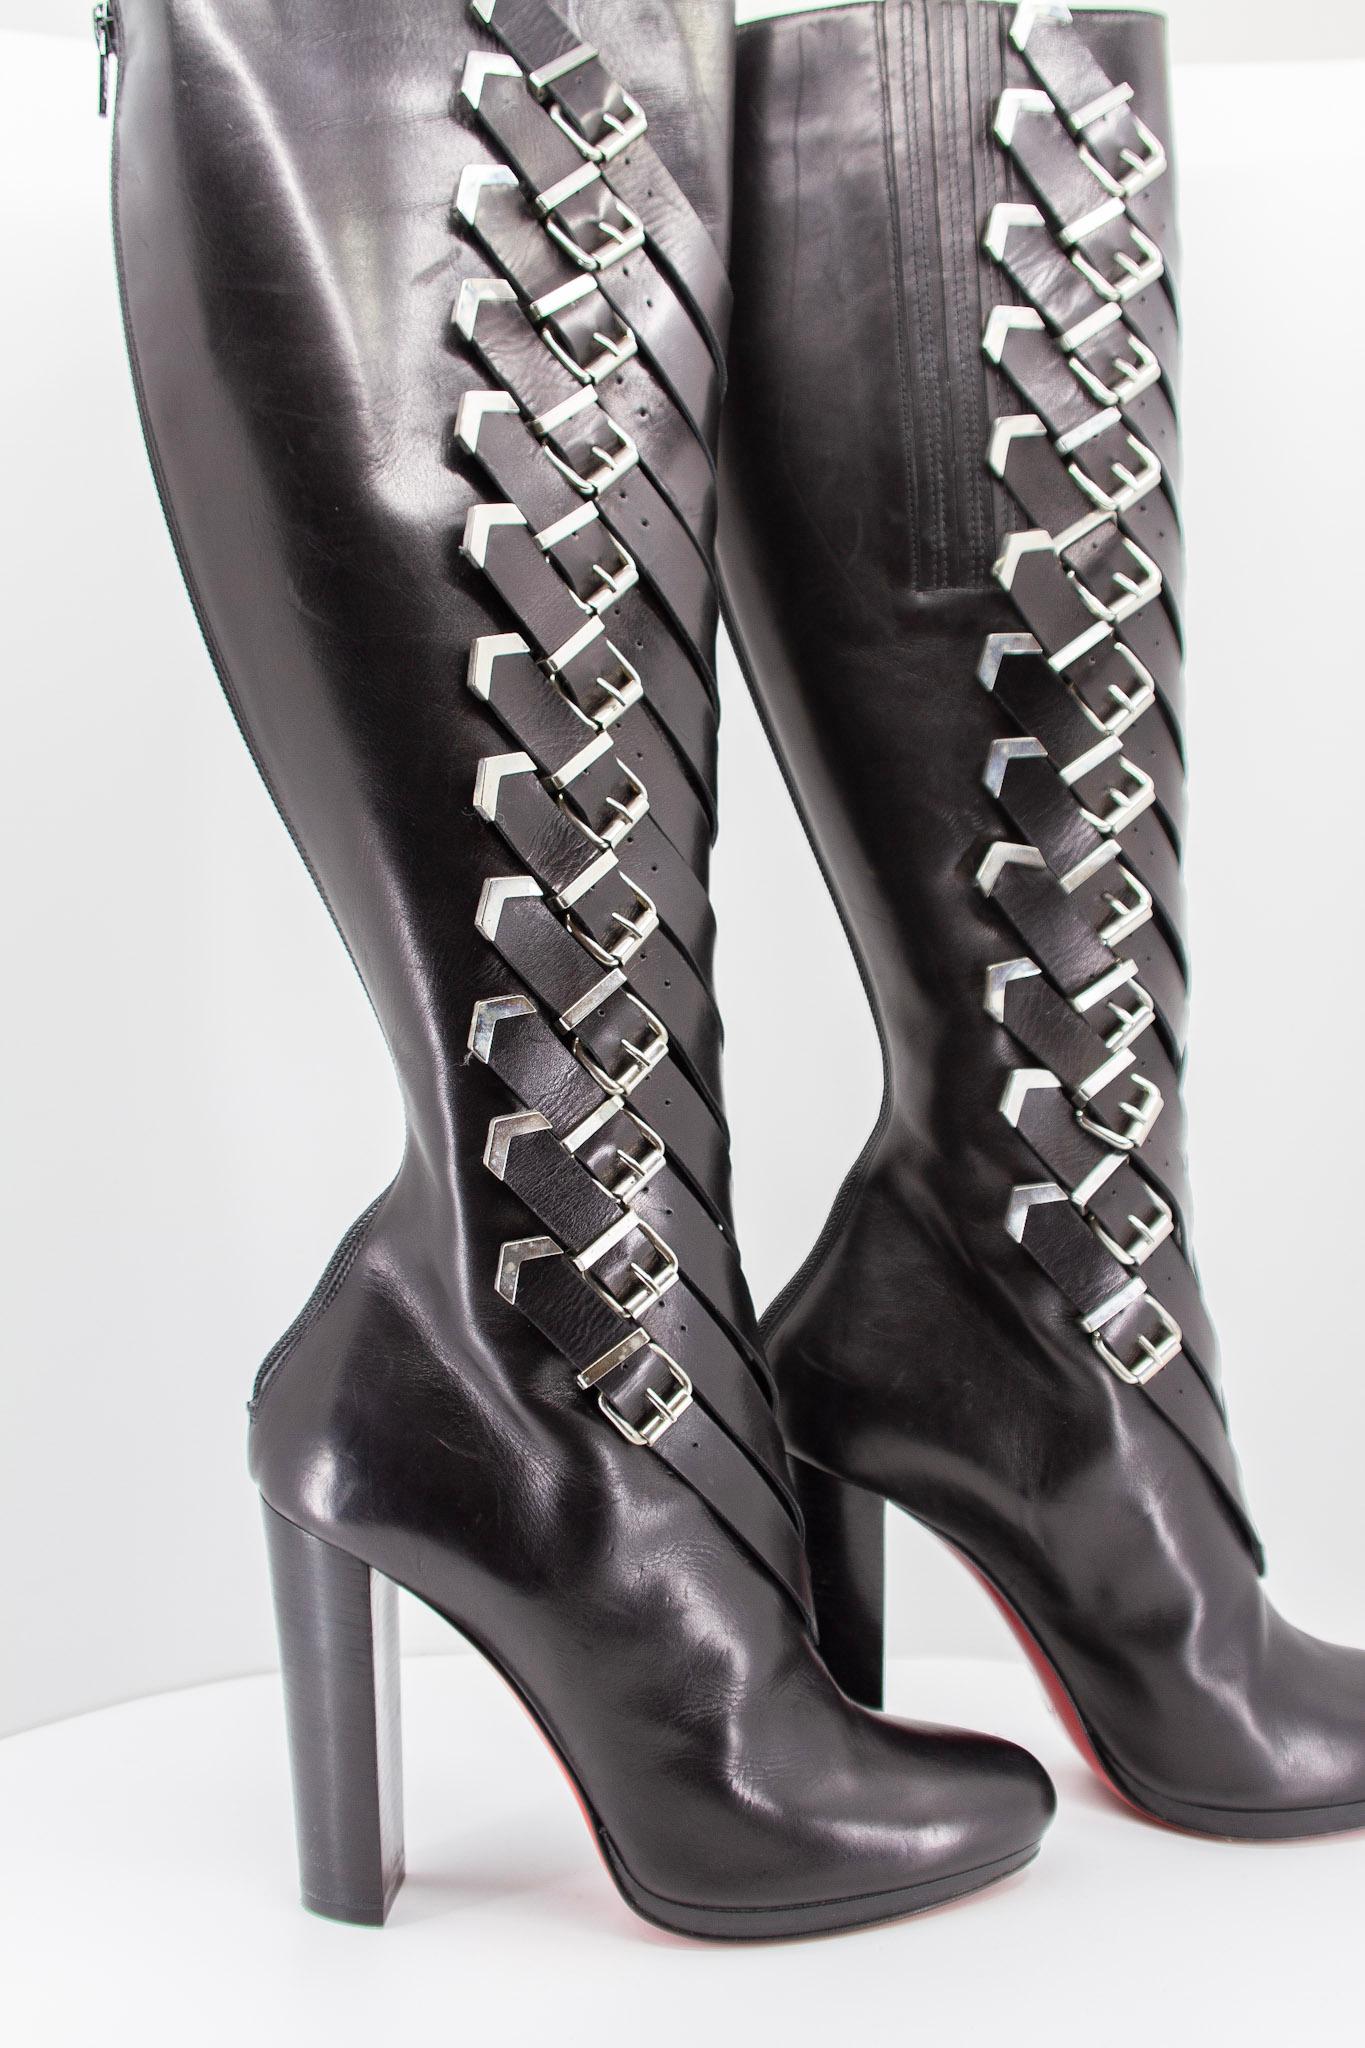 Rare Knee High Christian Louboutin Black Leather Boots For Sale 7